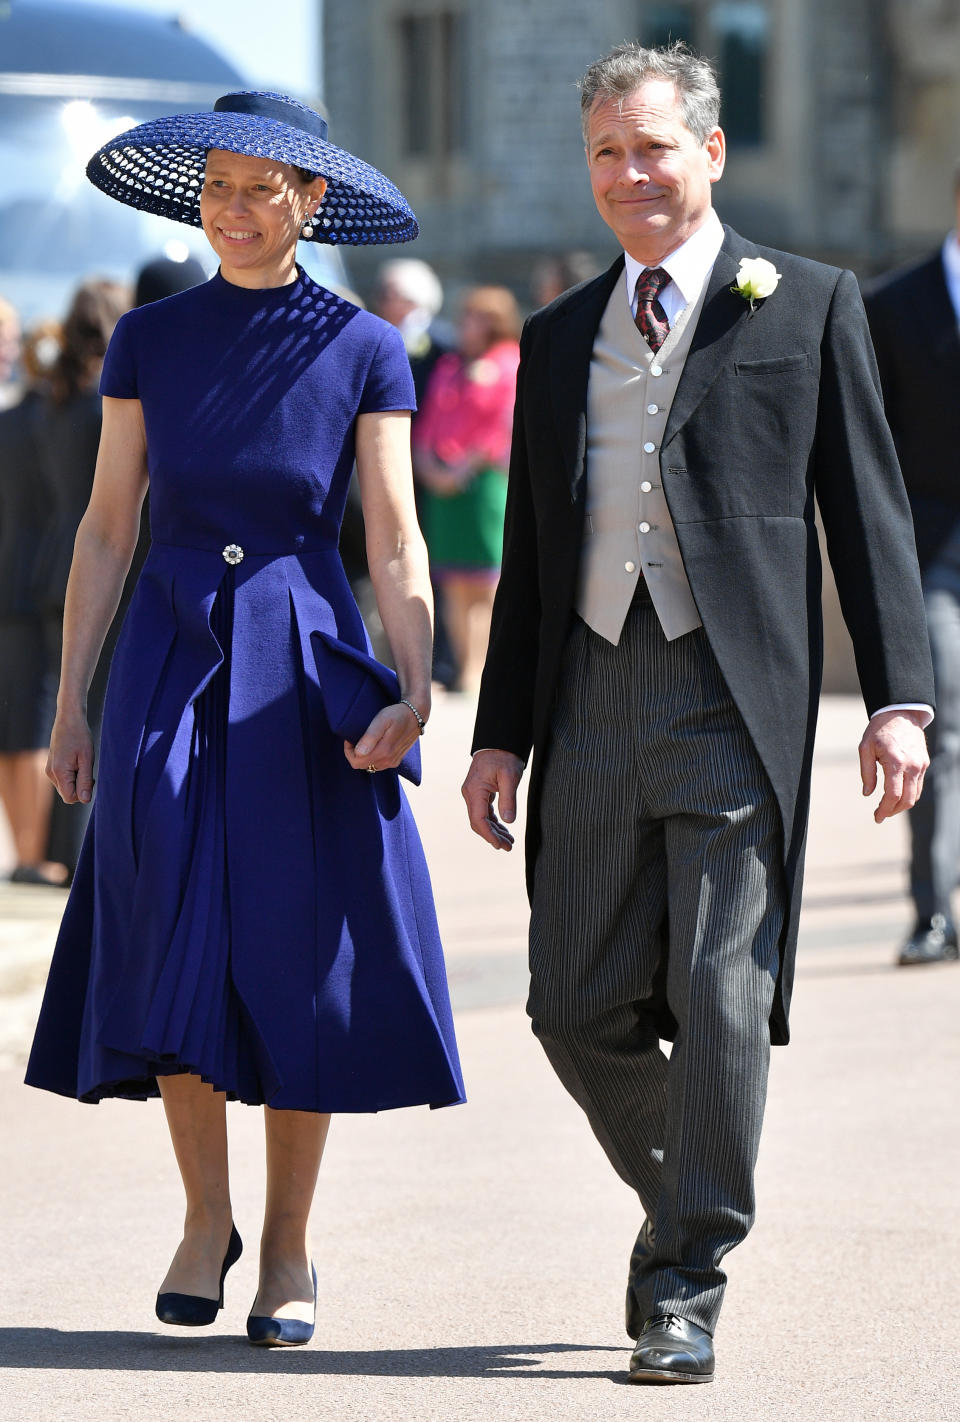 Lady Sarah Chatto and Daniel Chatto attend the wedding of Prince Harry to Ms Meghan Markle at St George's Chapel, Windsor Castle on May 19, 2018 in Windsor, England.